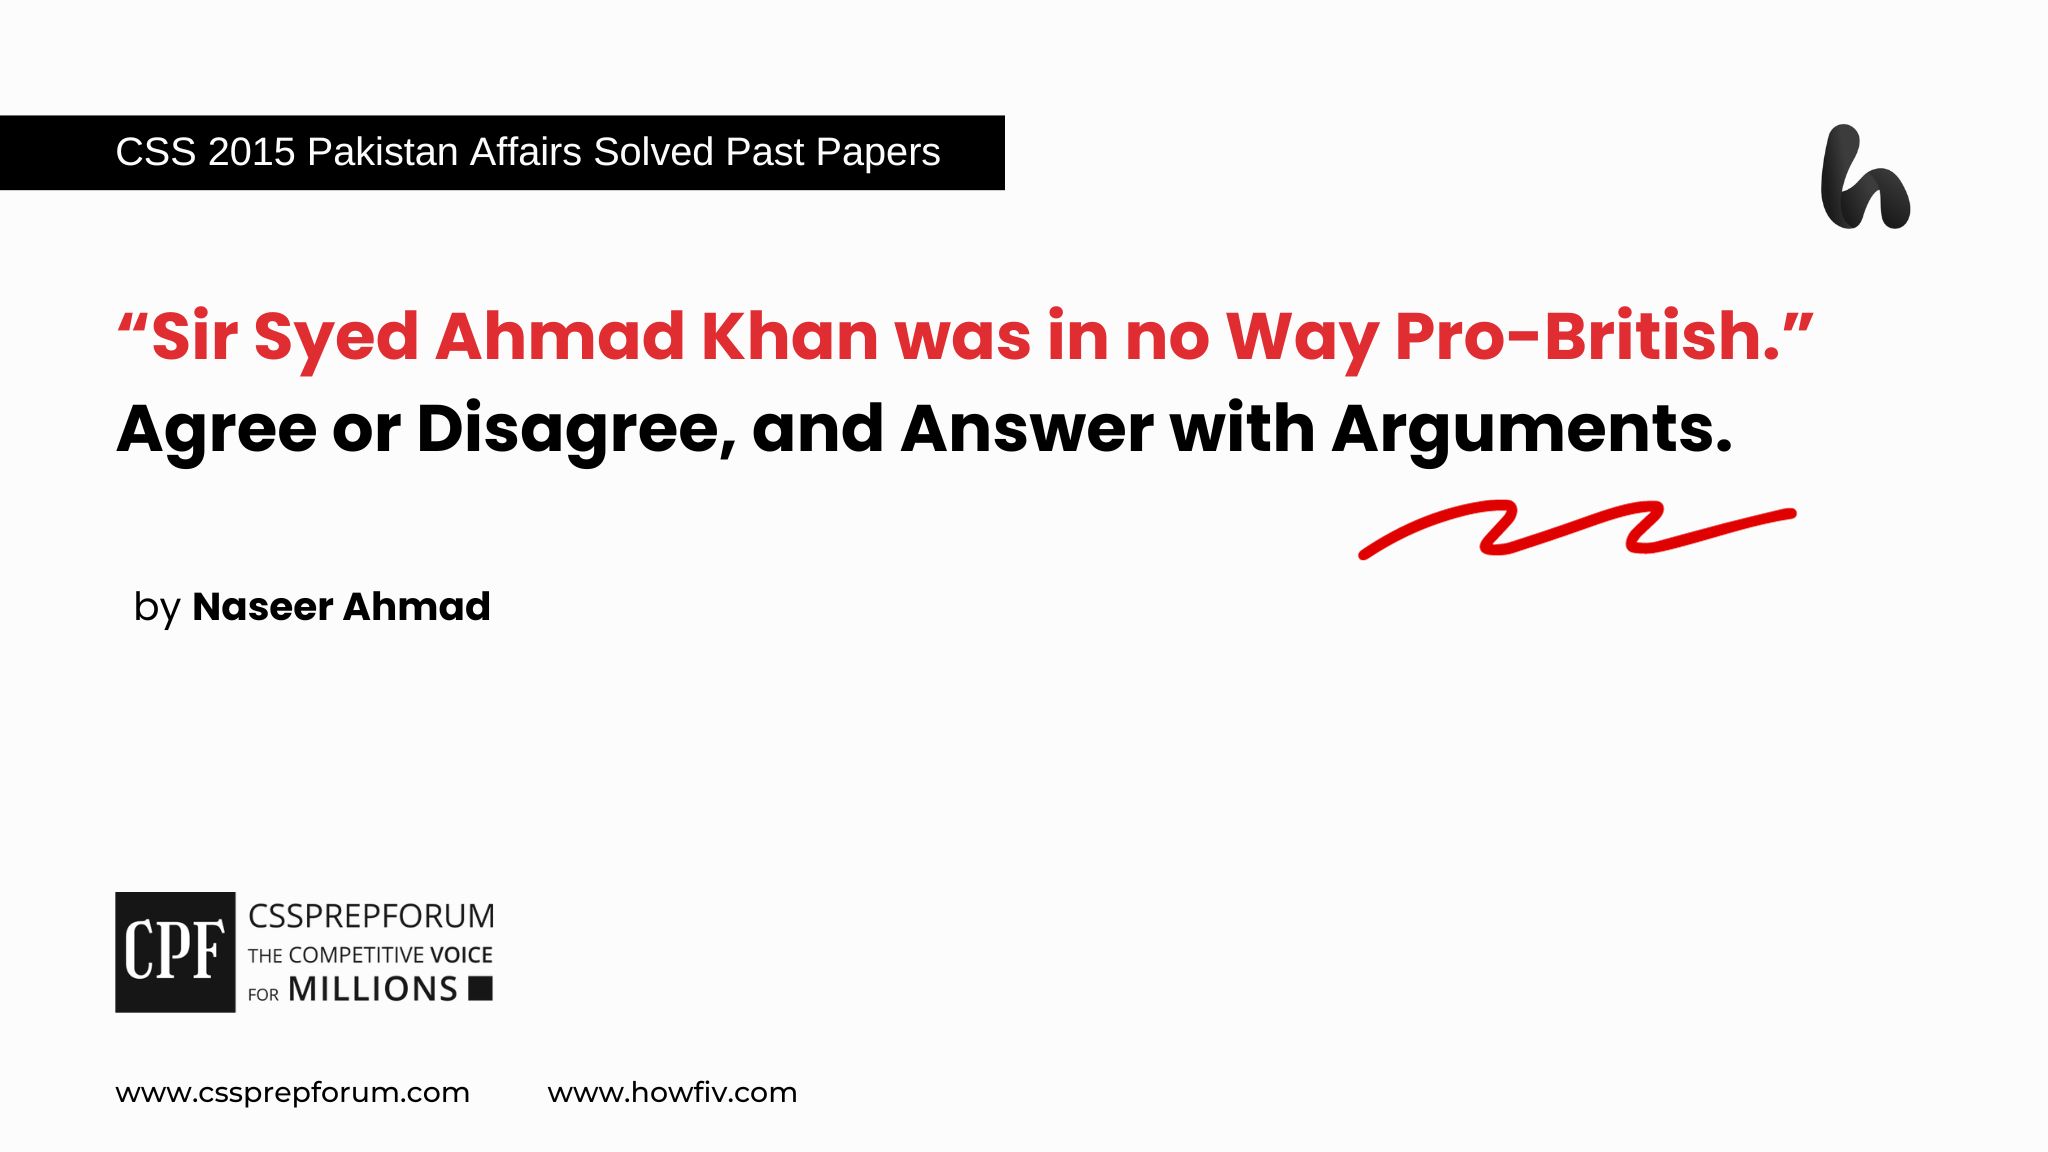 “Sir Syed Ahmad Khan was in no Way Pro-British.” Agree or Disagree, and Answer with Arguments.